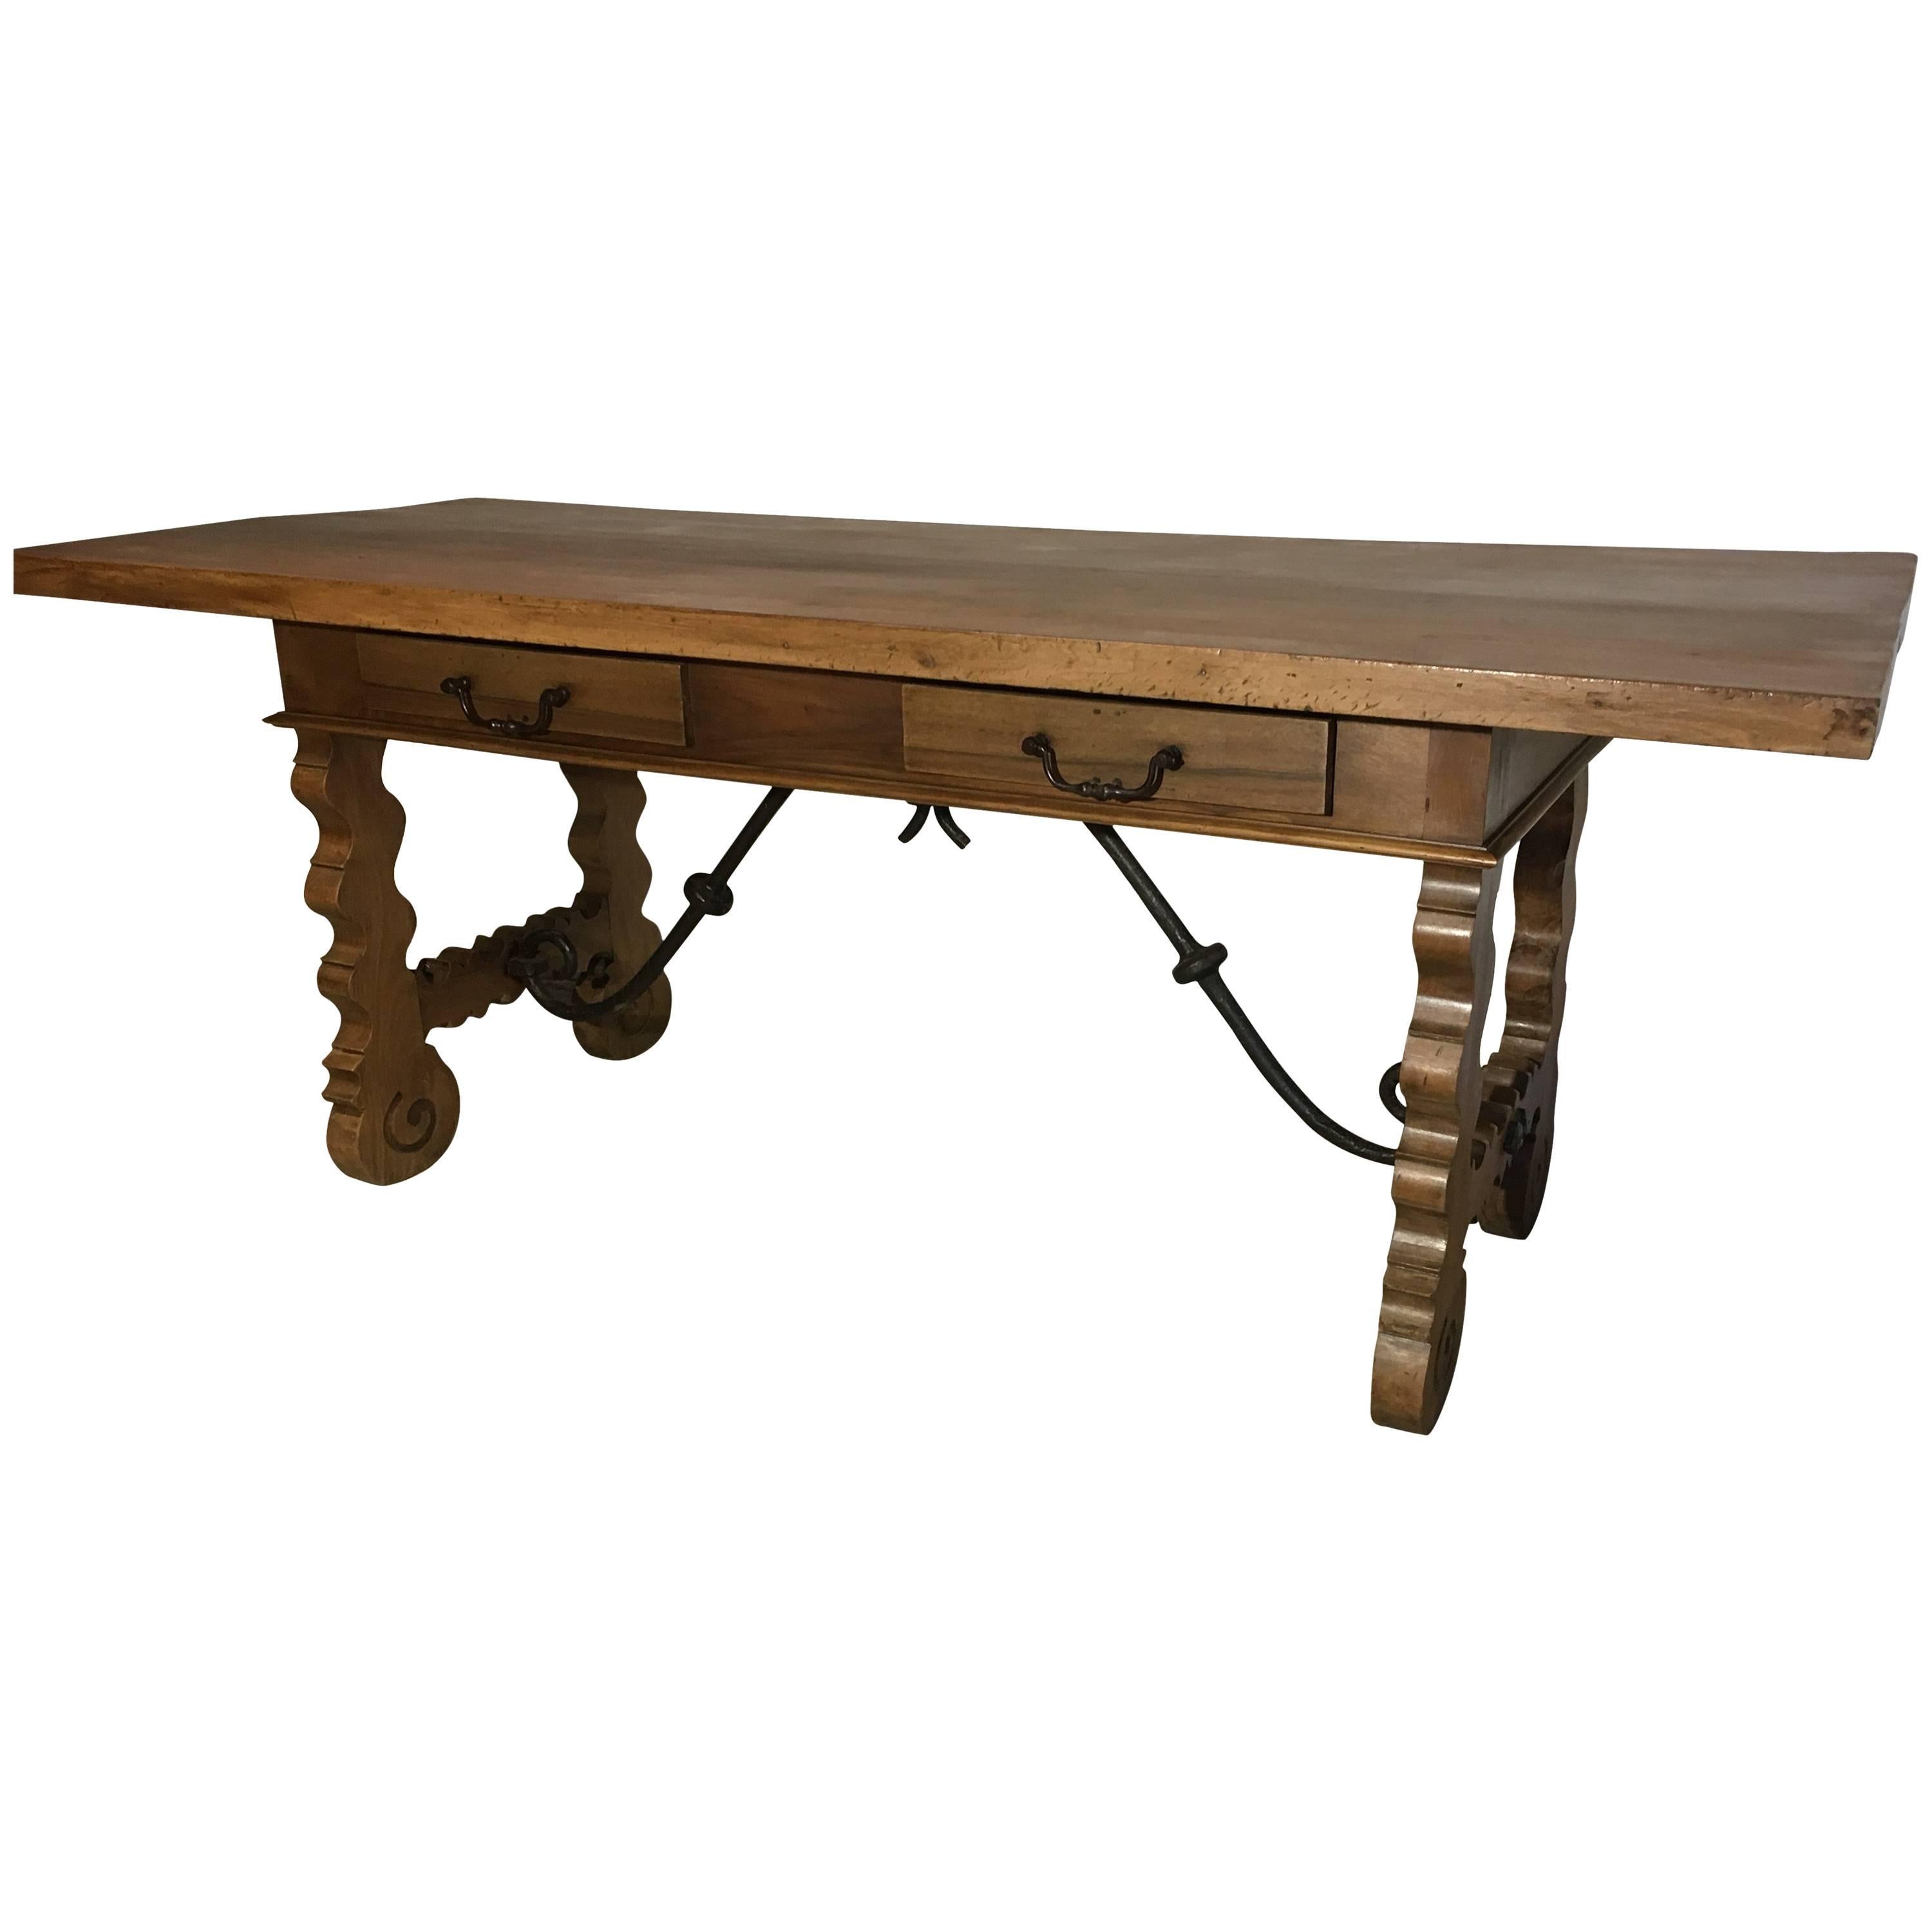 18th Century Baroque Farm Refectory Desk Table with Two Drawers & Stretchers For Sale